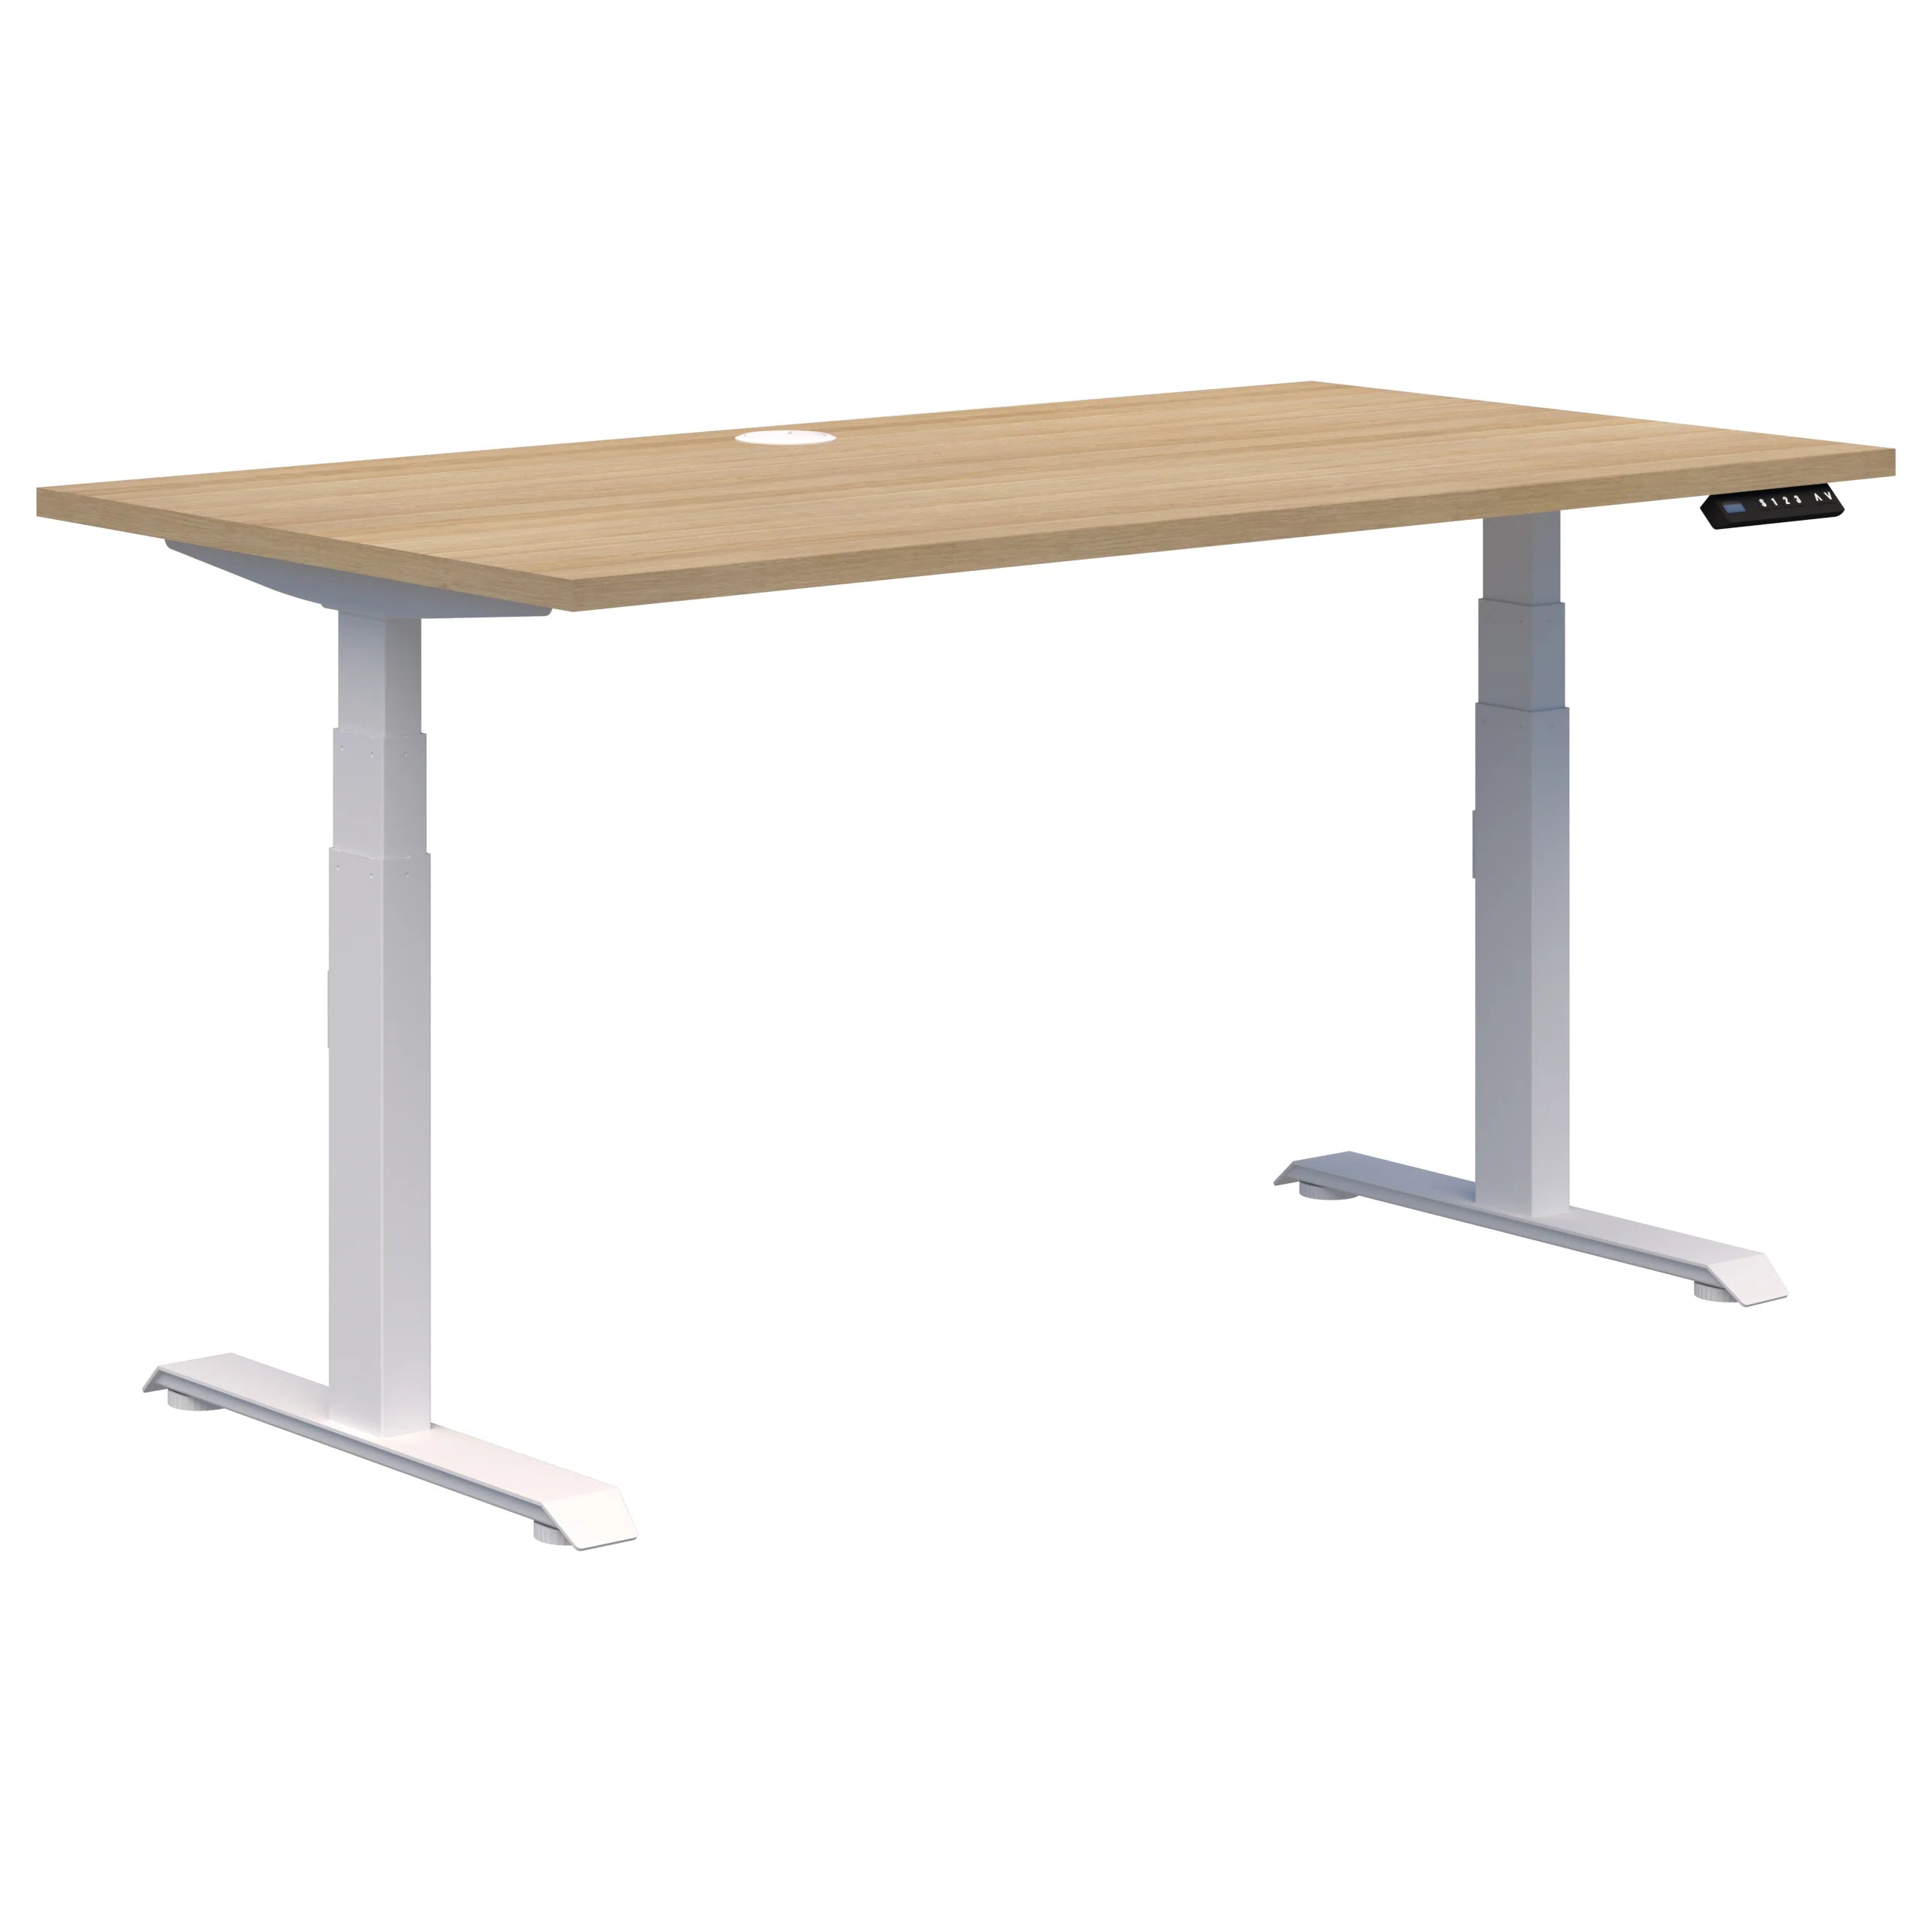 Summit electric height adjustable office desk with white frame and classic oak top.